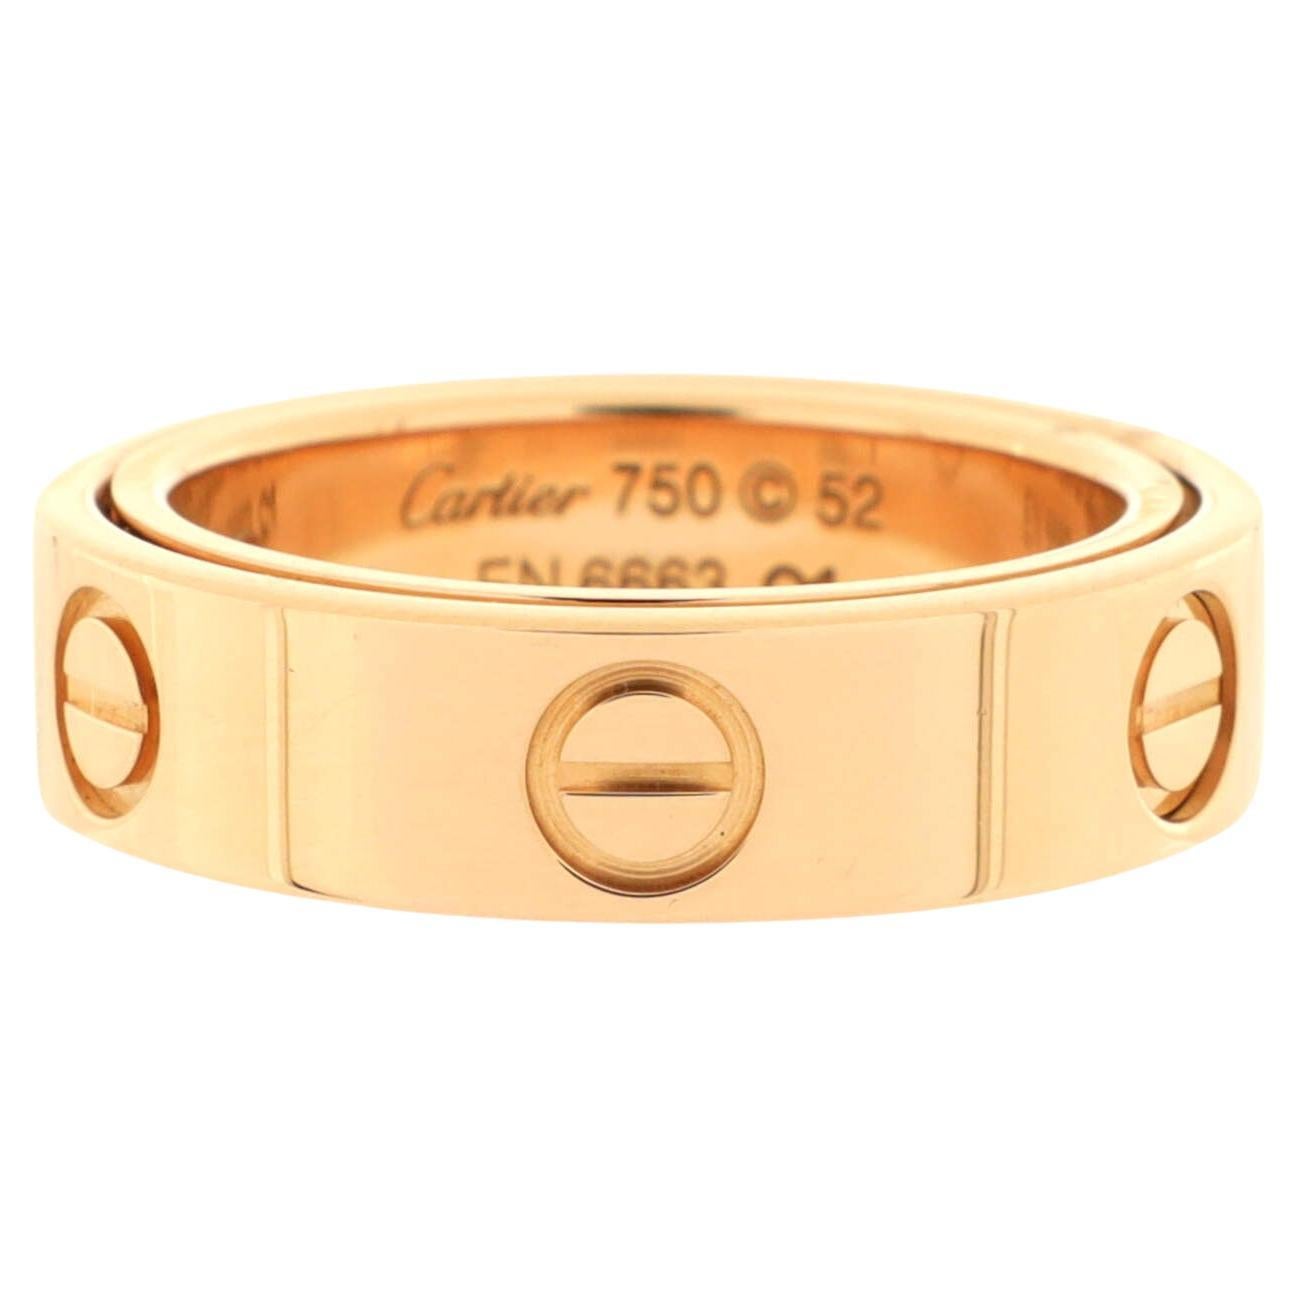 Cartier Astro LOVE Ring 18K Rose Gold 5.5mm